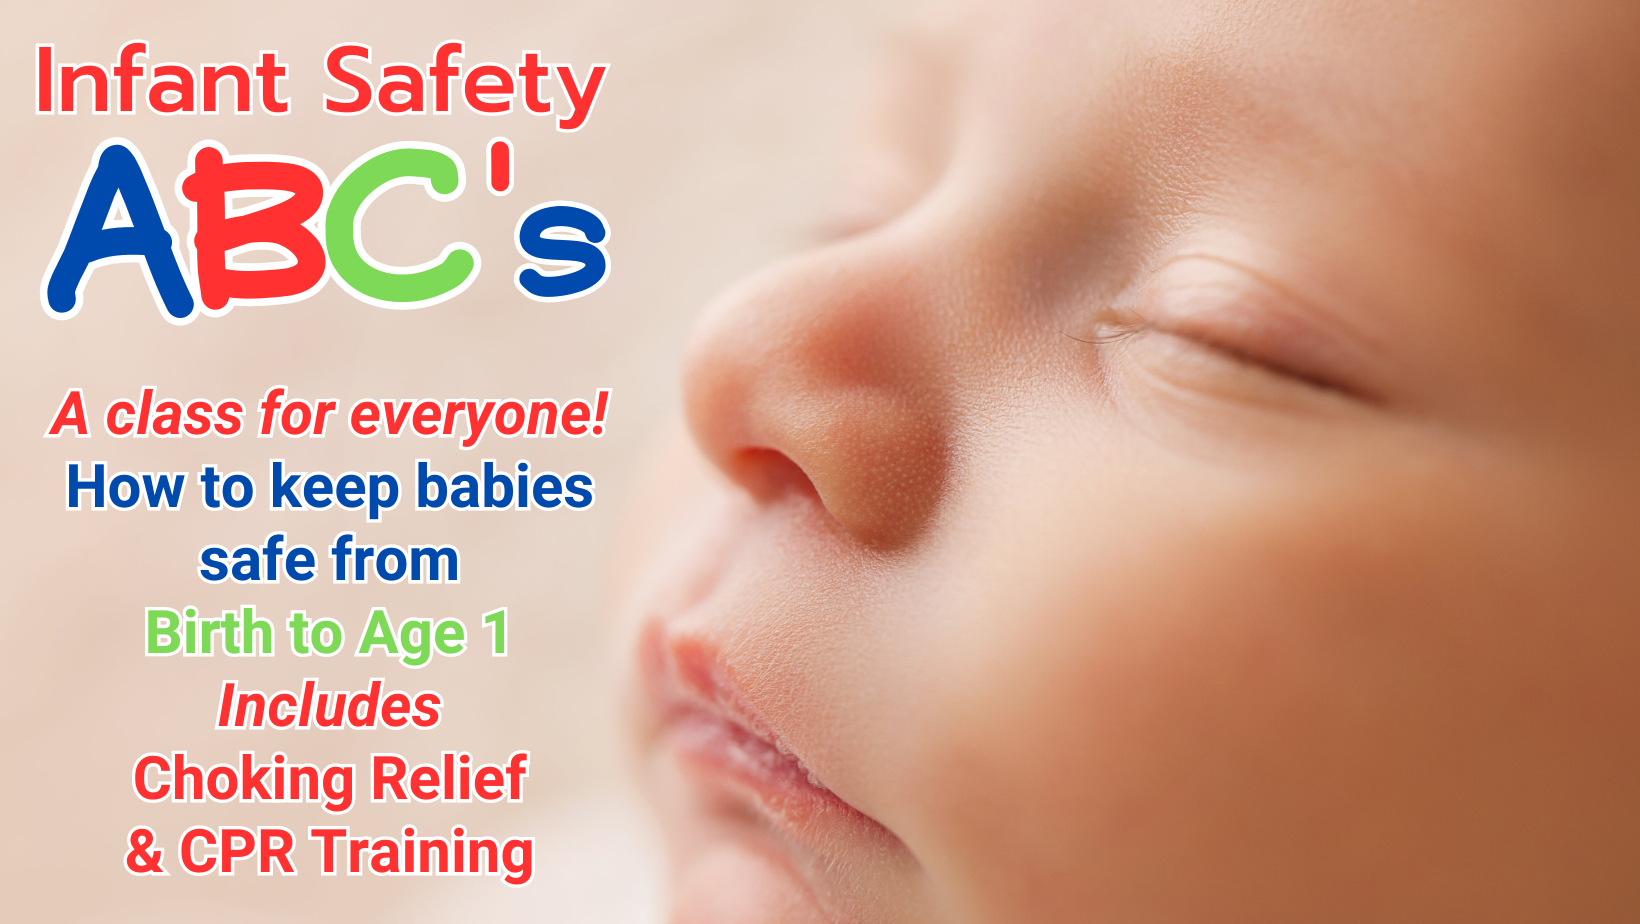 Infant Safety ABC's